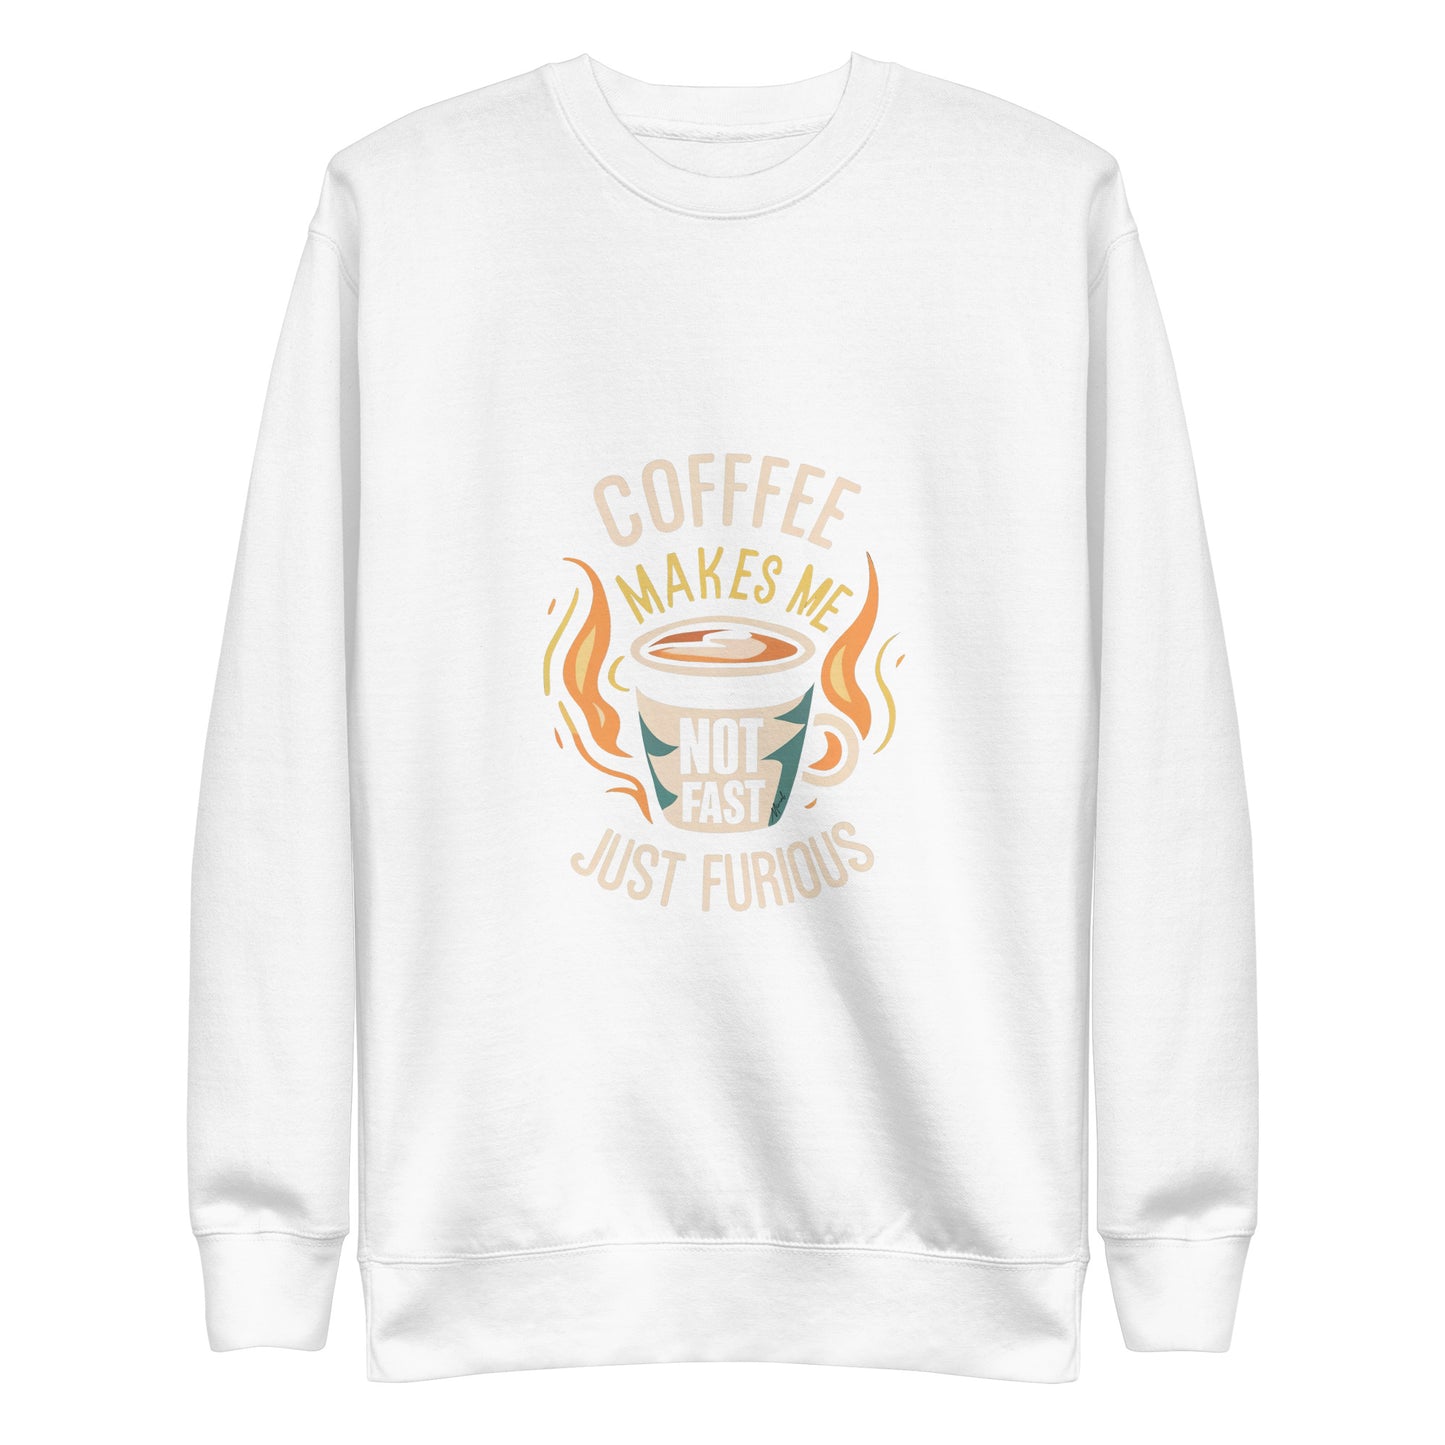 Coffe makes me not fast just furious (Unisex)